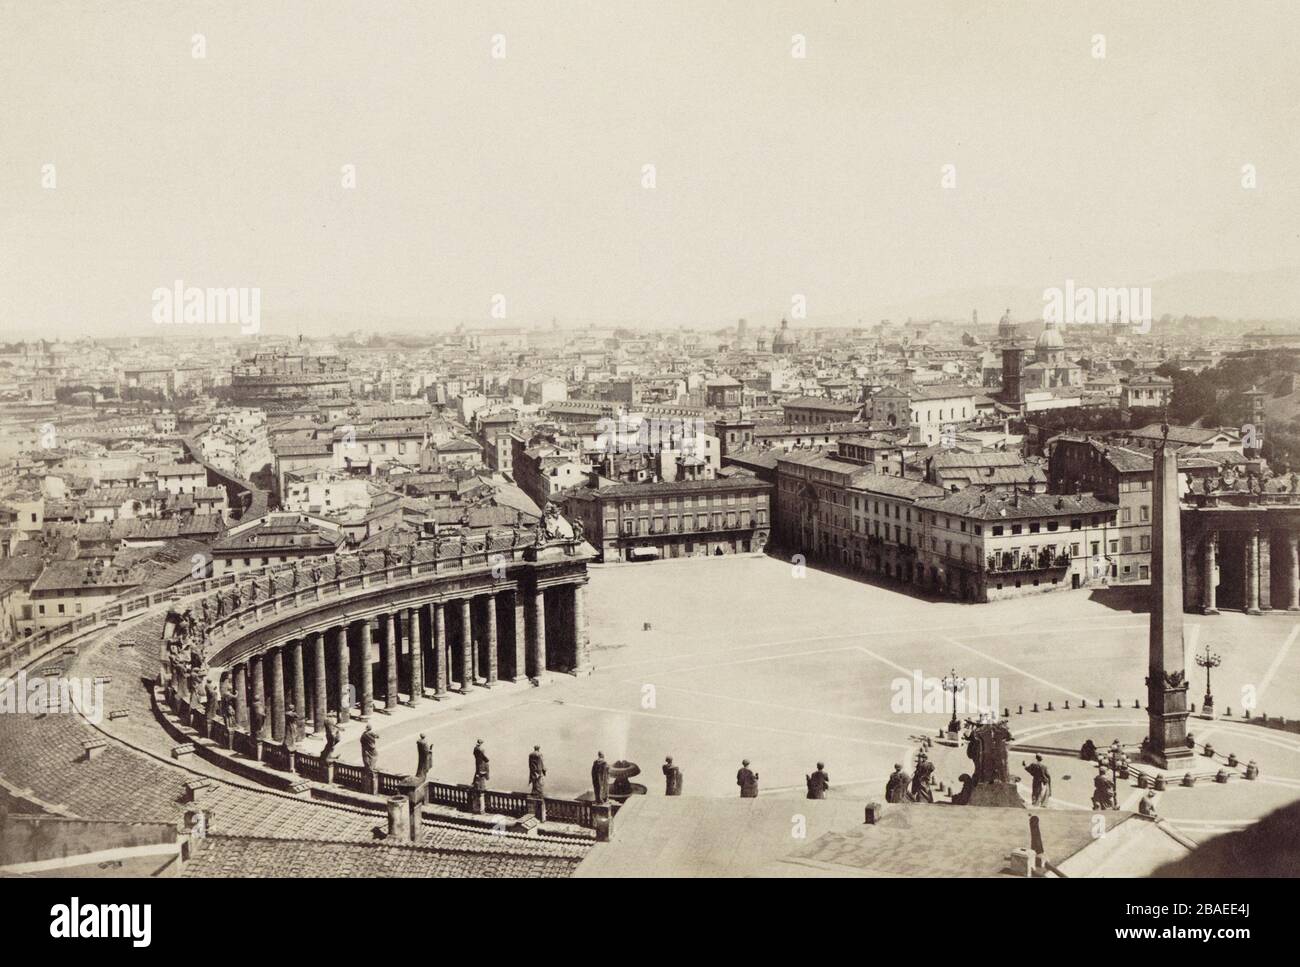 19th century image of St. Peter's Square, a large plaza located directly in front of St. Peter's Basilica in the Vatican City, the papal enclave insid Stock Photo